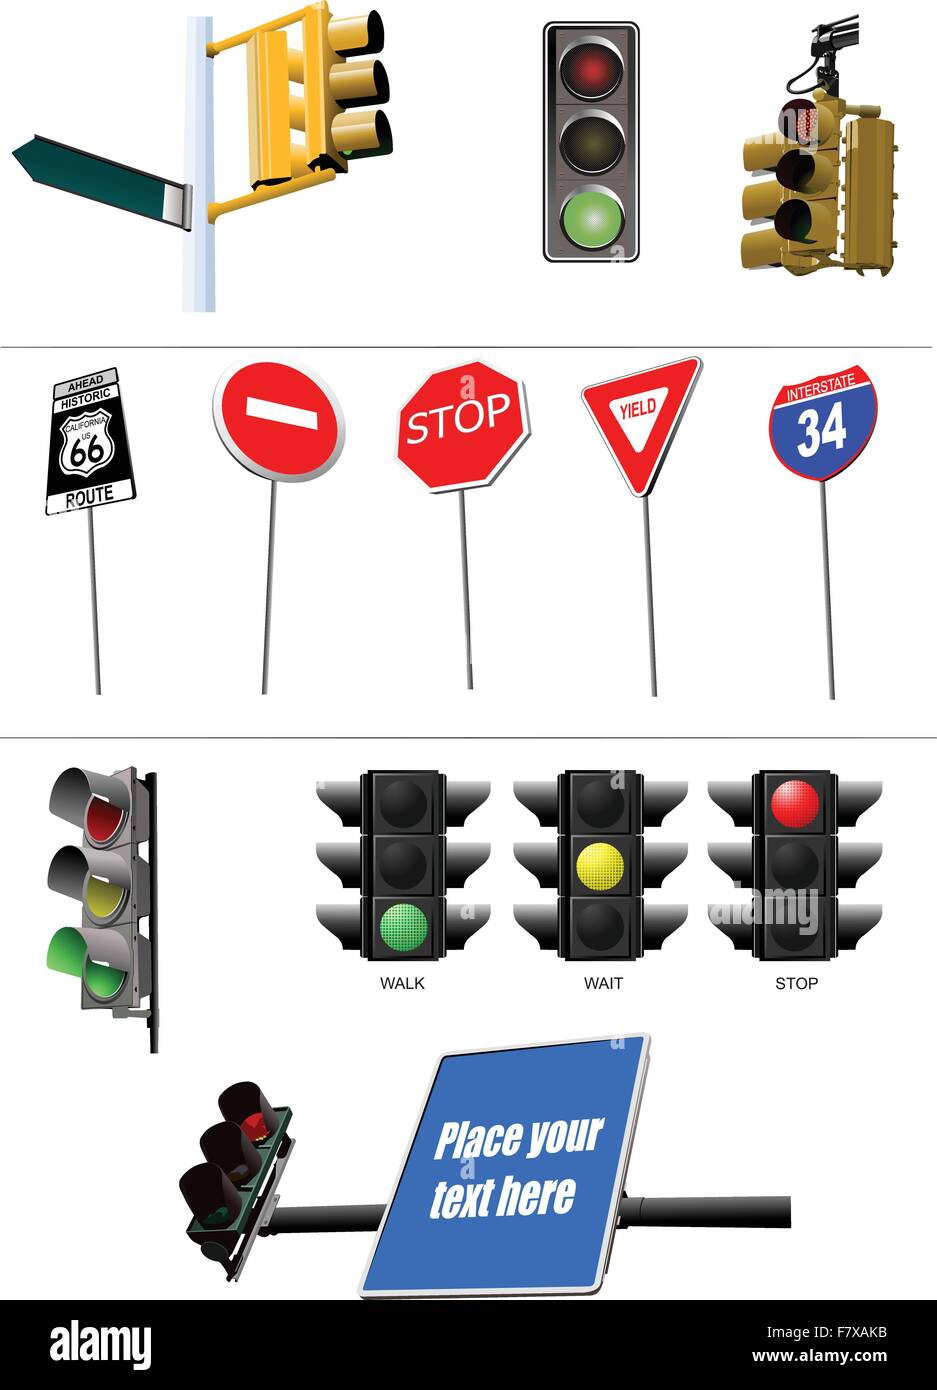 Set of traffic lights. Red signal. Yellow signal. Green signal Stock Vector